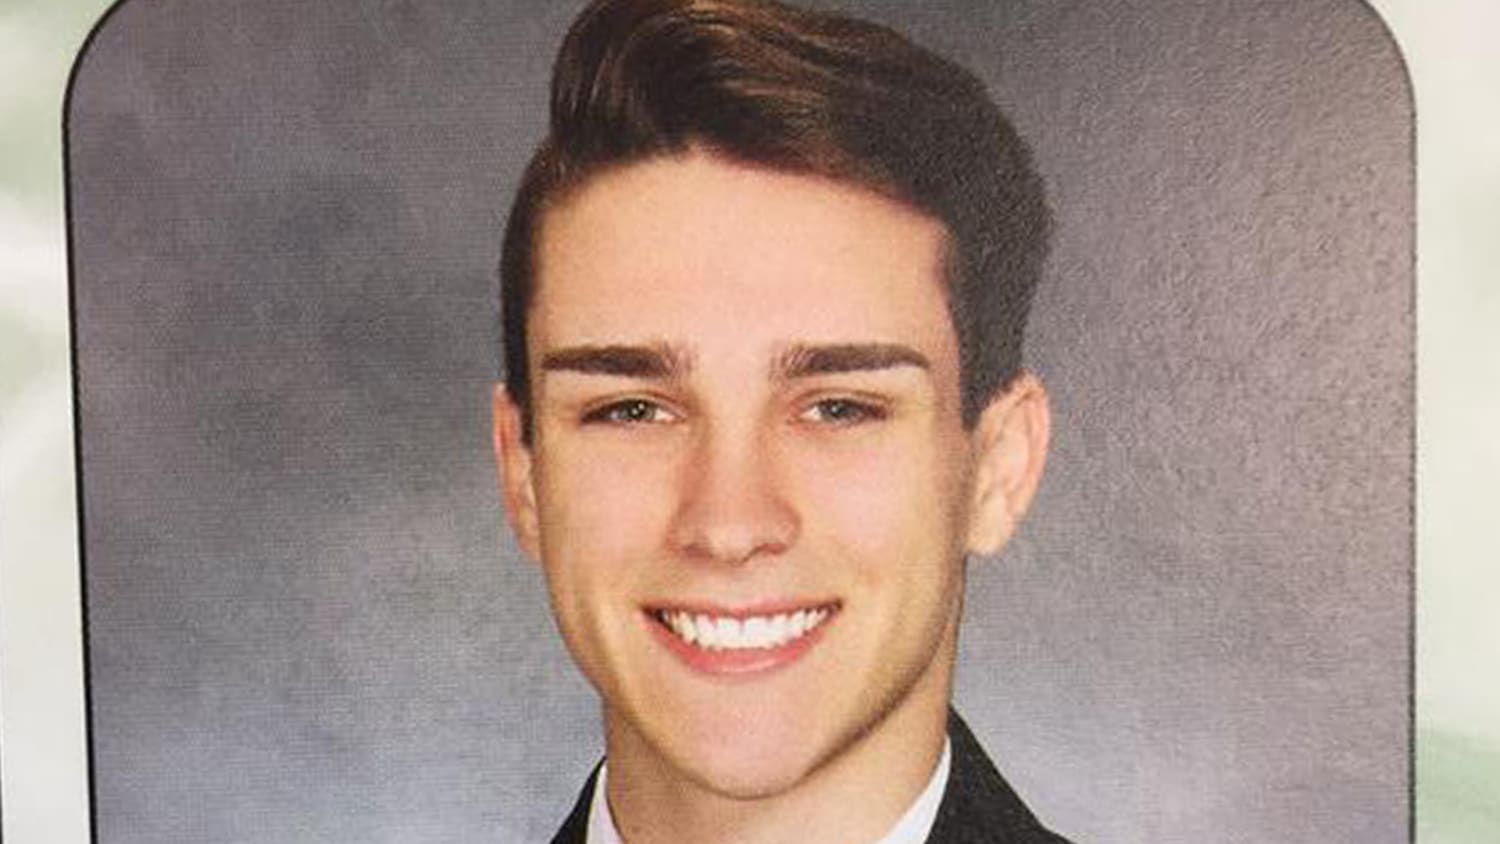 Teen comes out of the closet in yearbook with hilarious quote